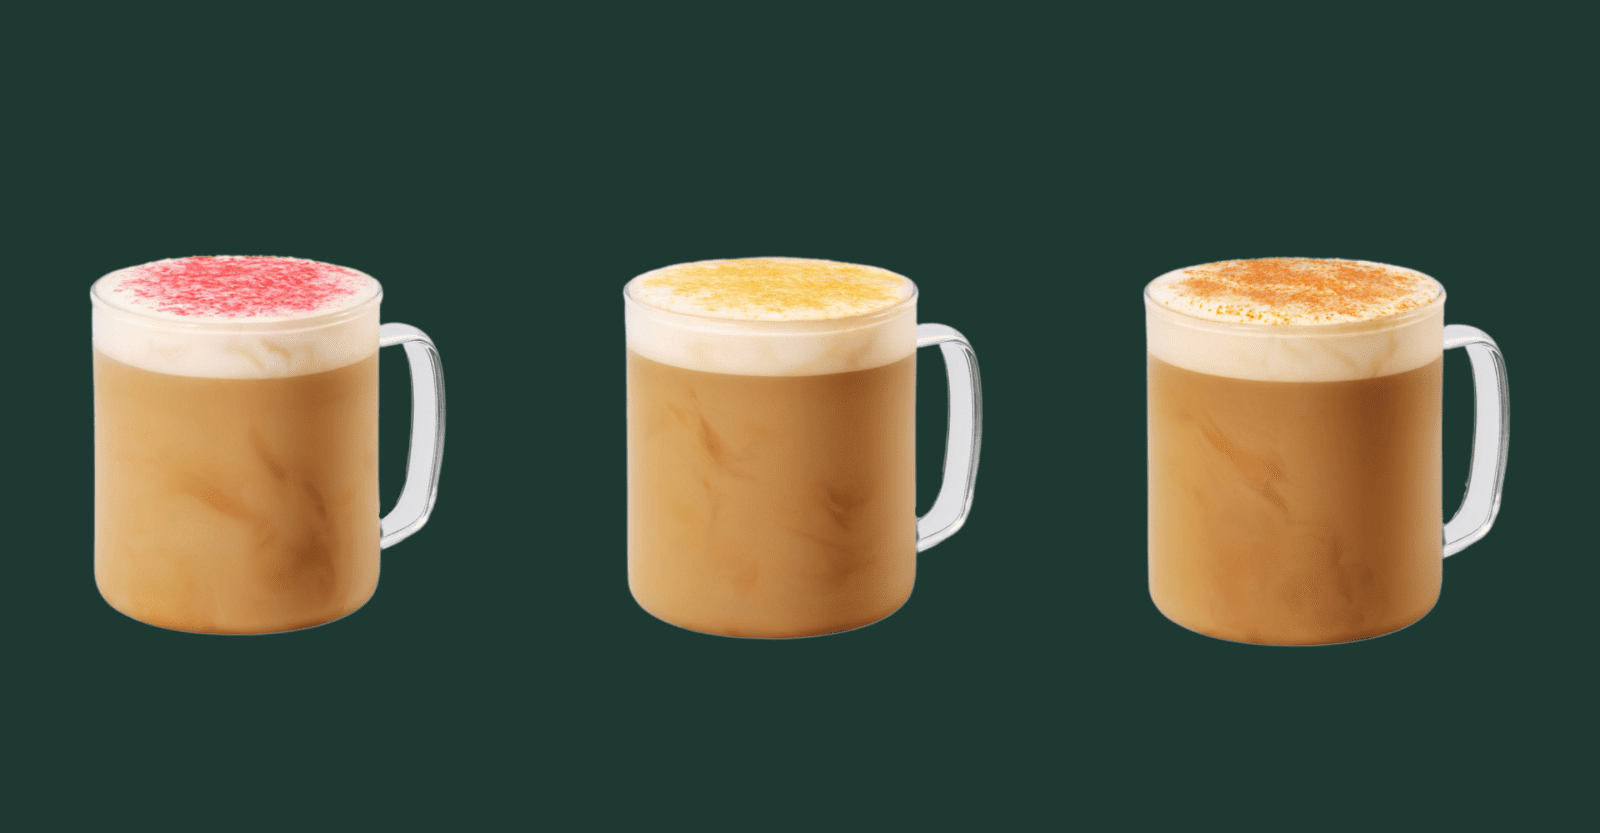 Starbucks is now offering all milk alternatives for free in the UK, The Manc